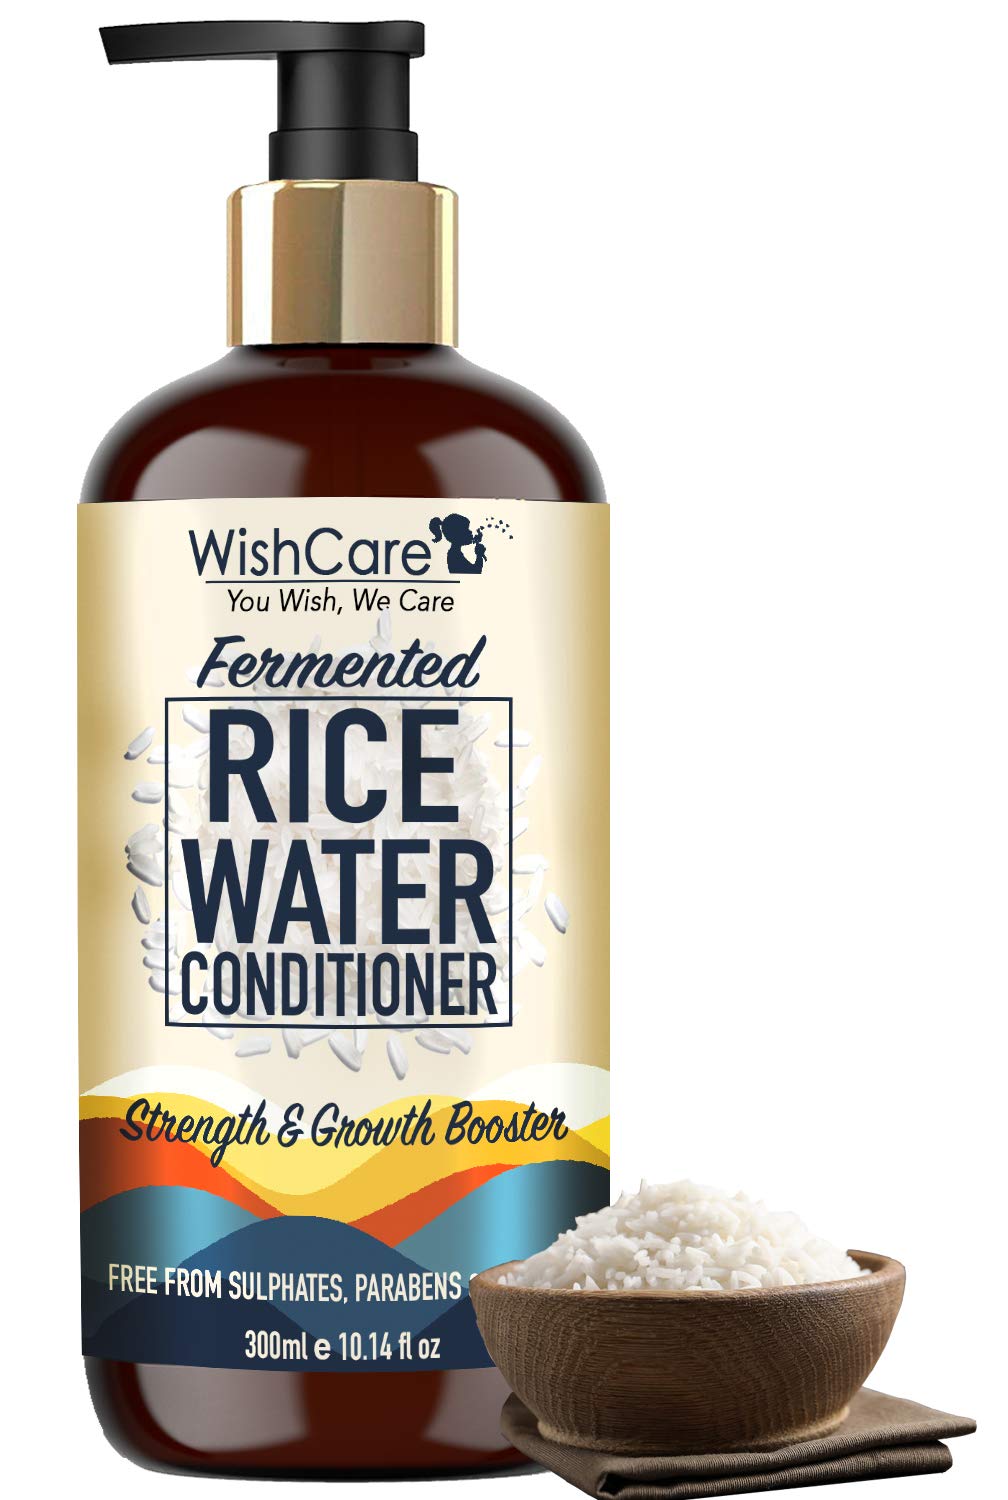 wishcare-fermented-rice-water-conditioner